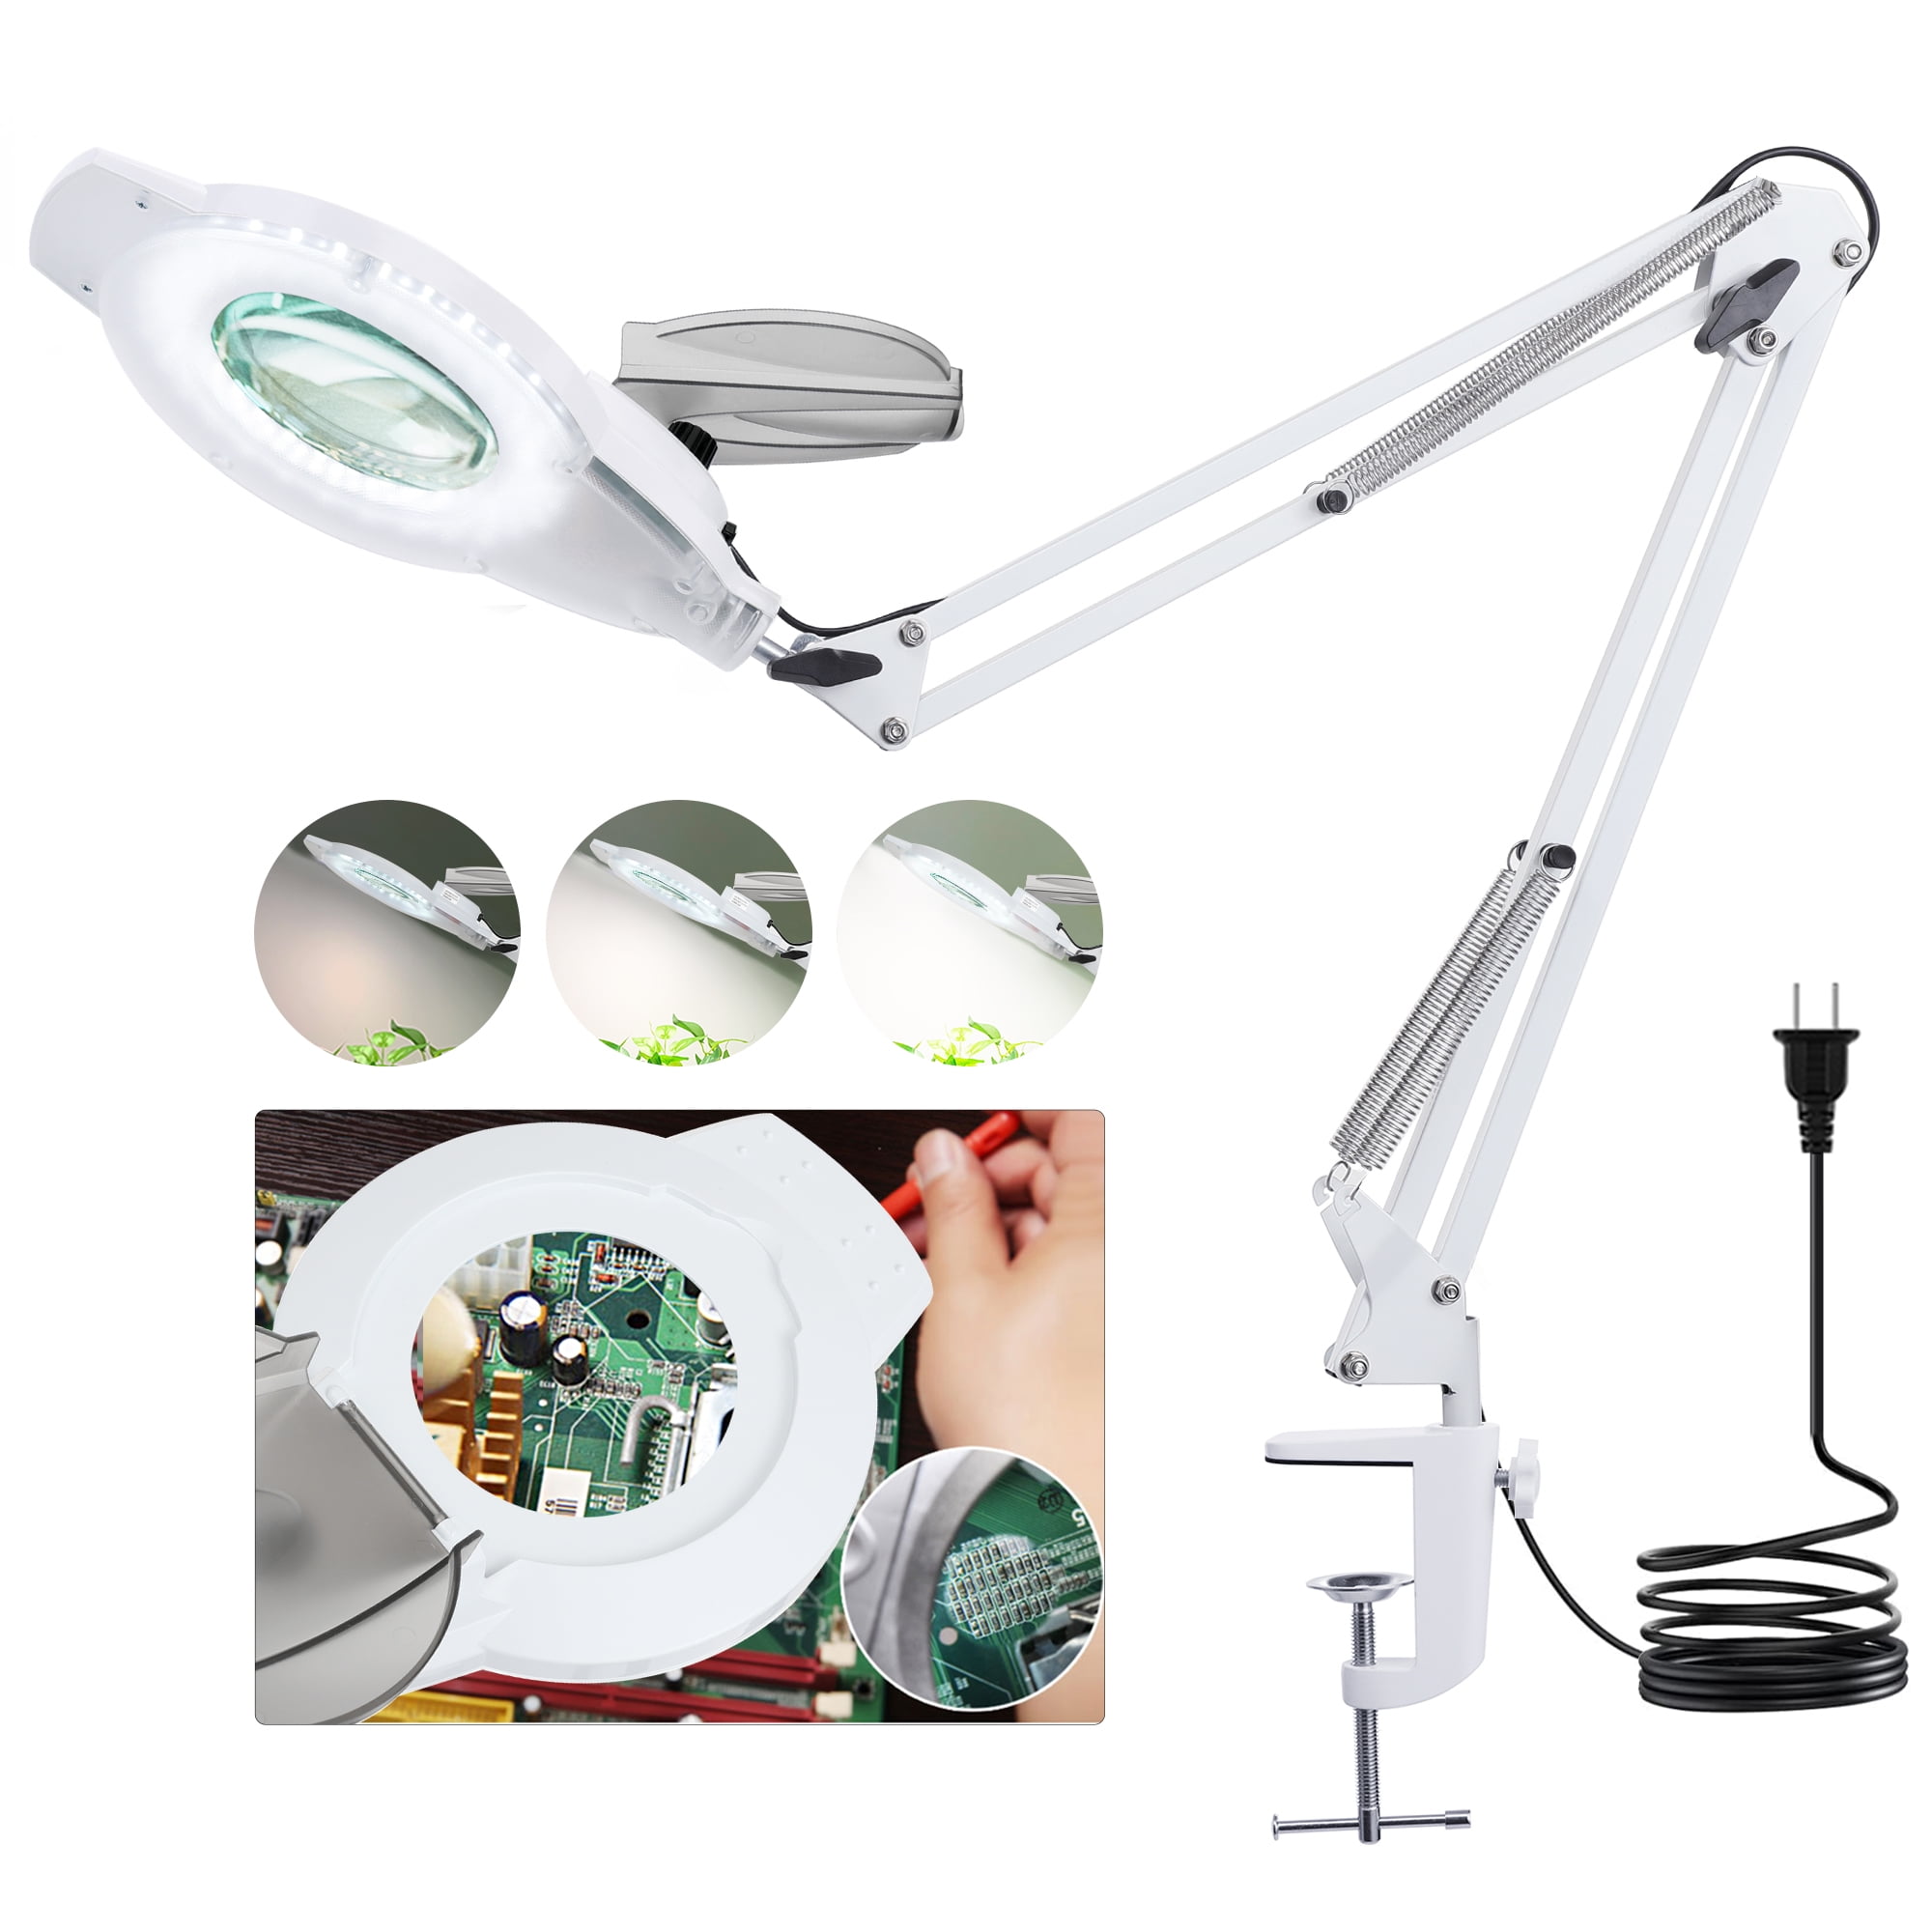 10X LED Magnifying Lamp with Clamp, KIRKAS 2,200 Lumens Dimmable